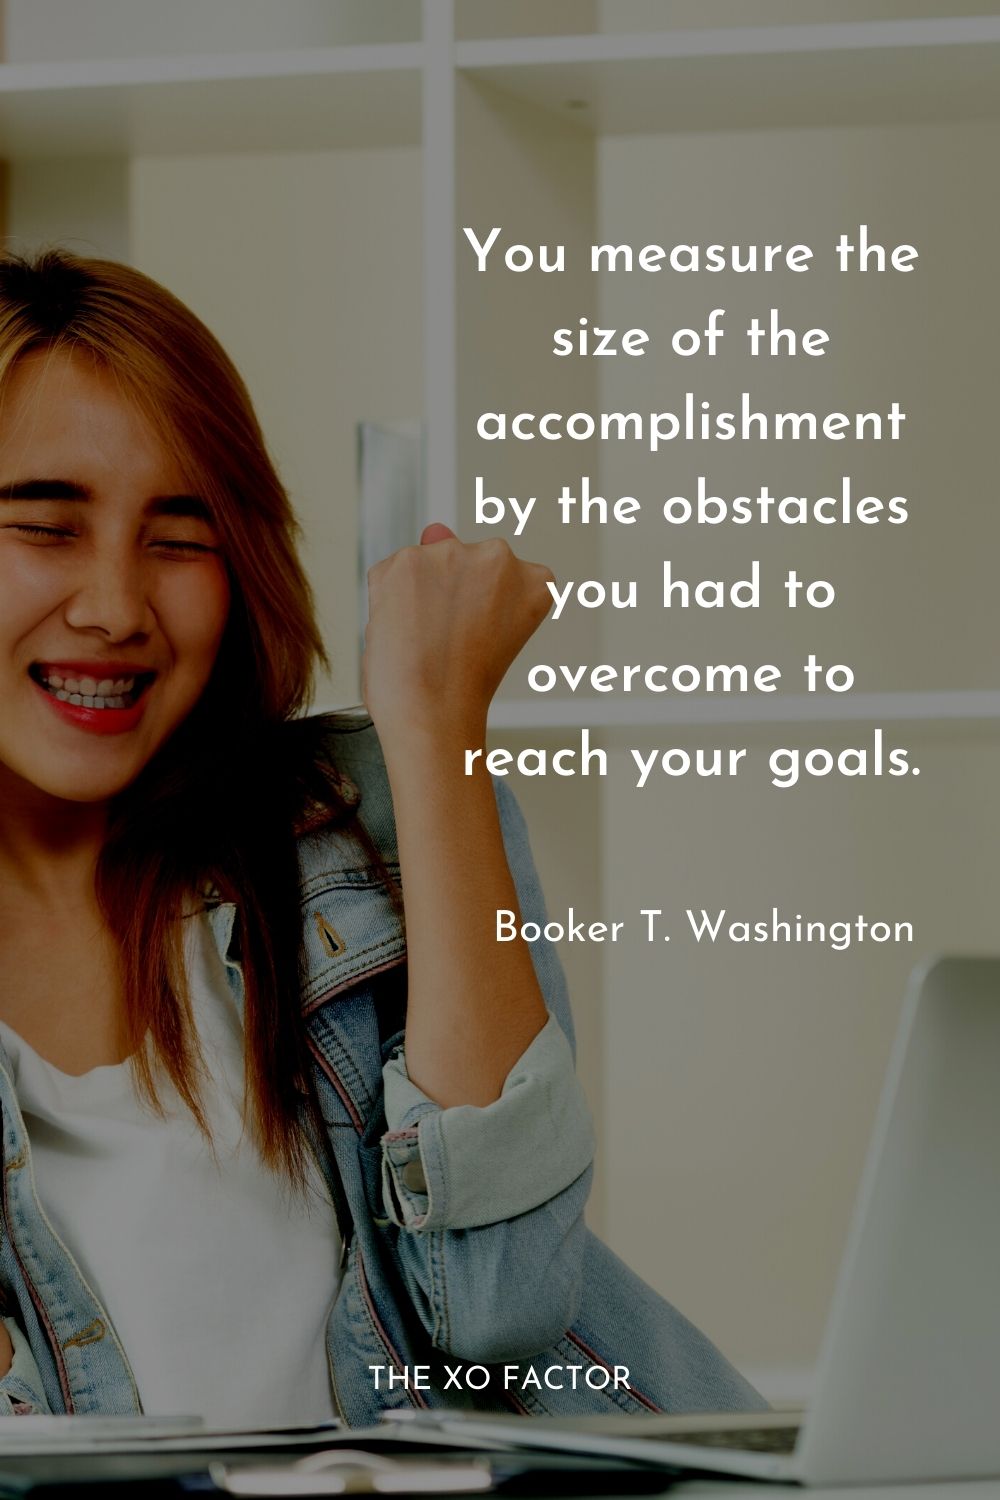 You measure the size of the accomplishment by the obstacles you had to overcome to reach your goals.